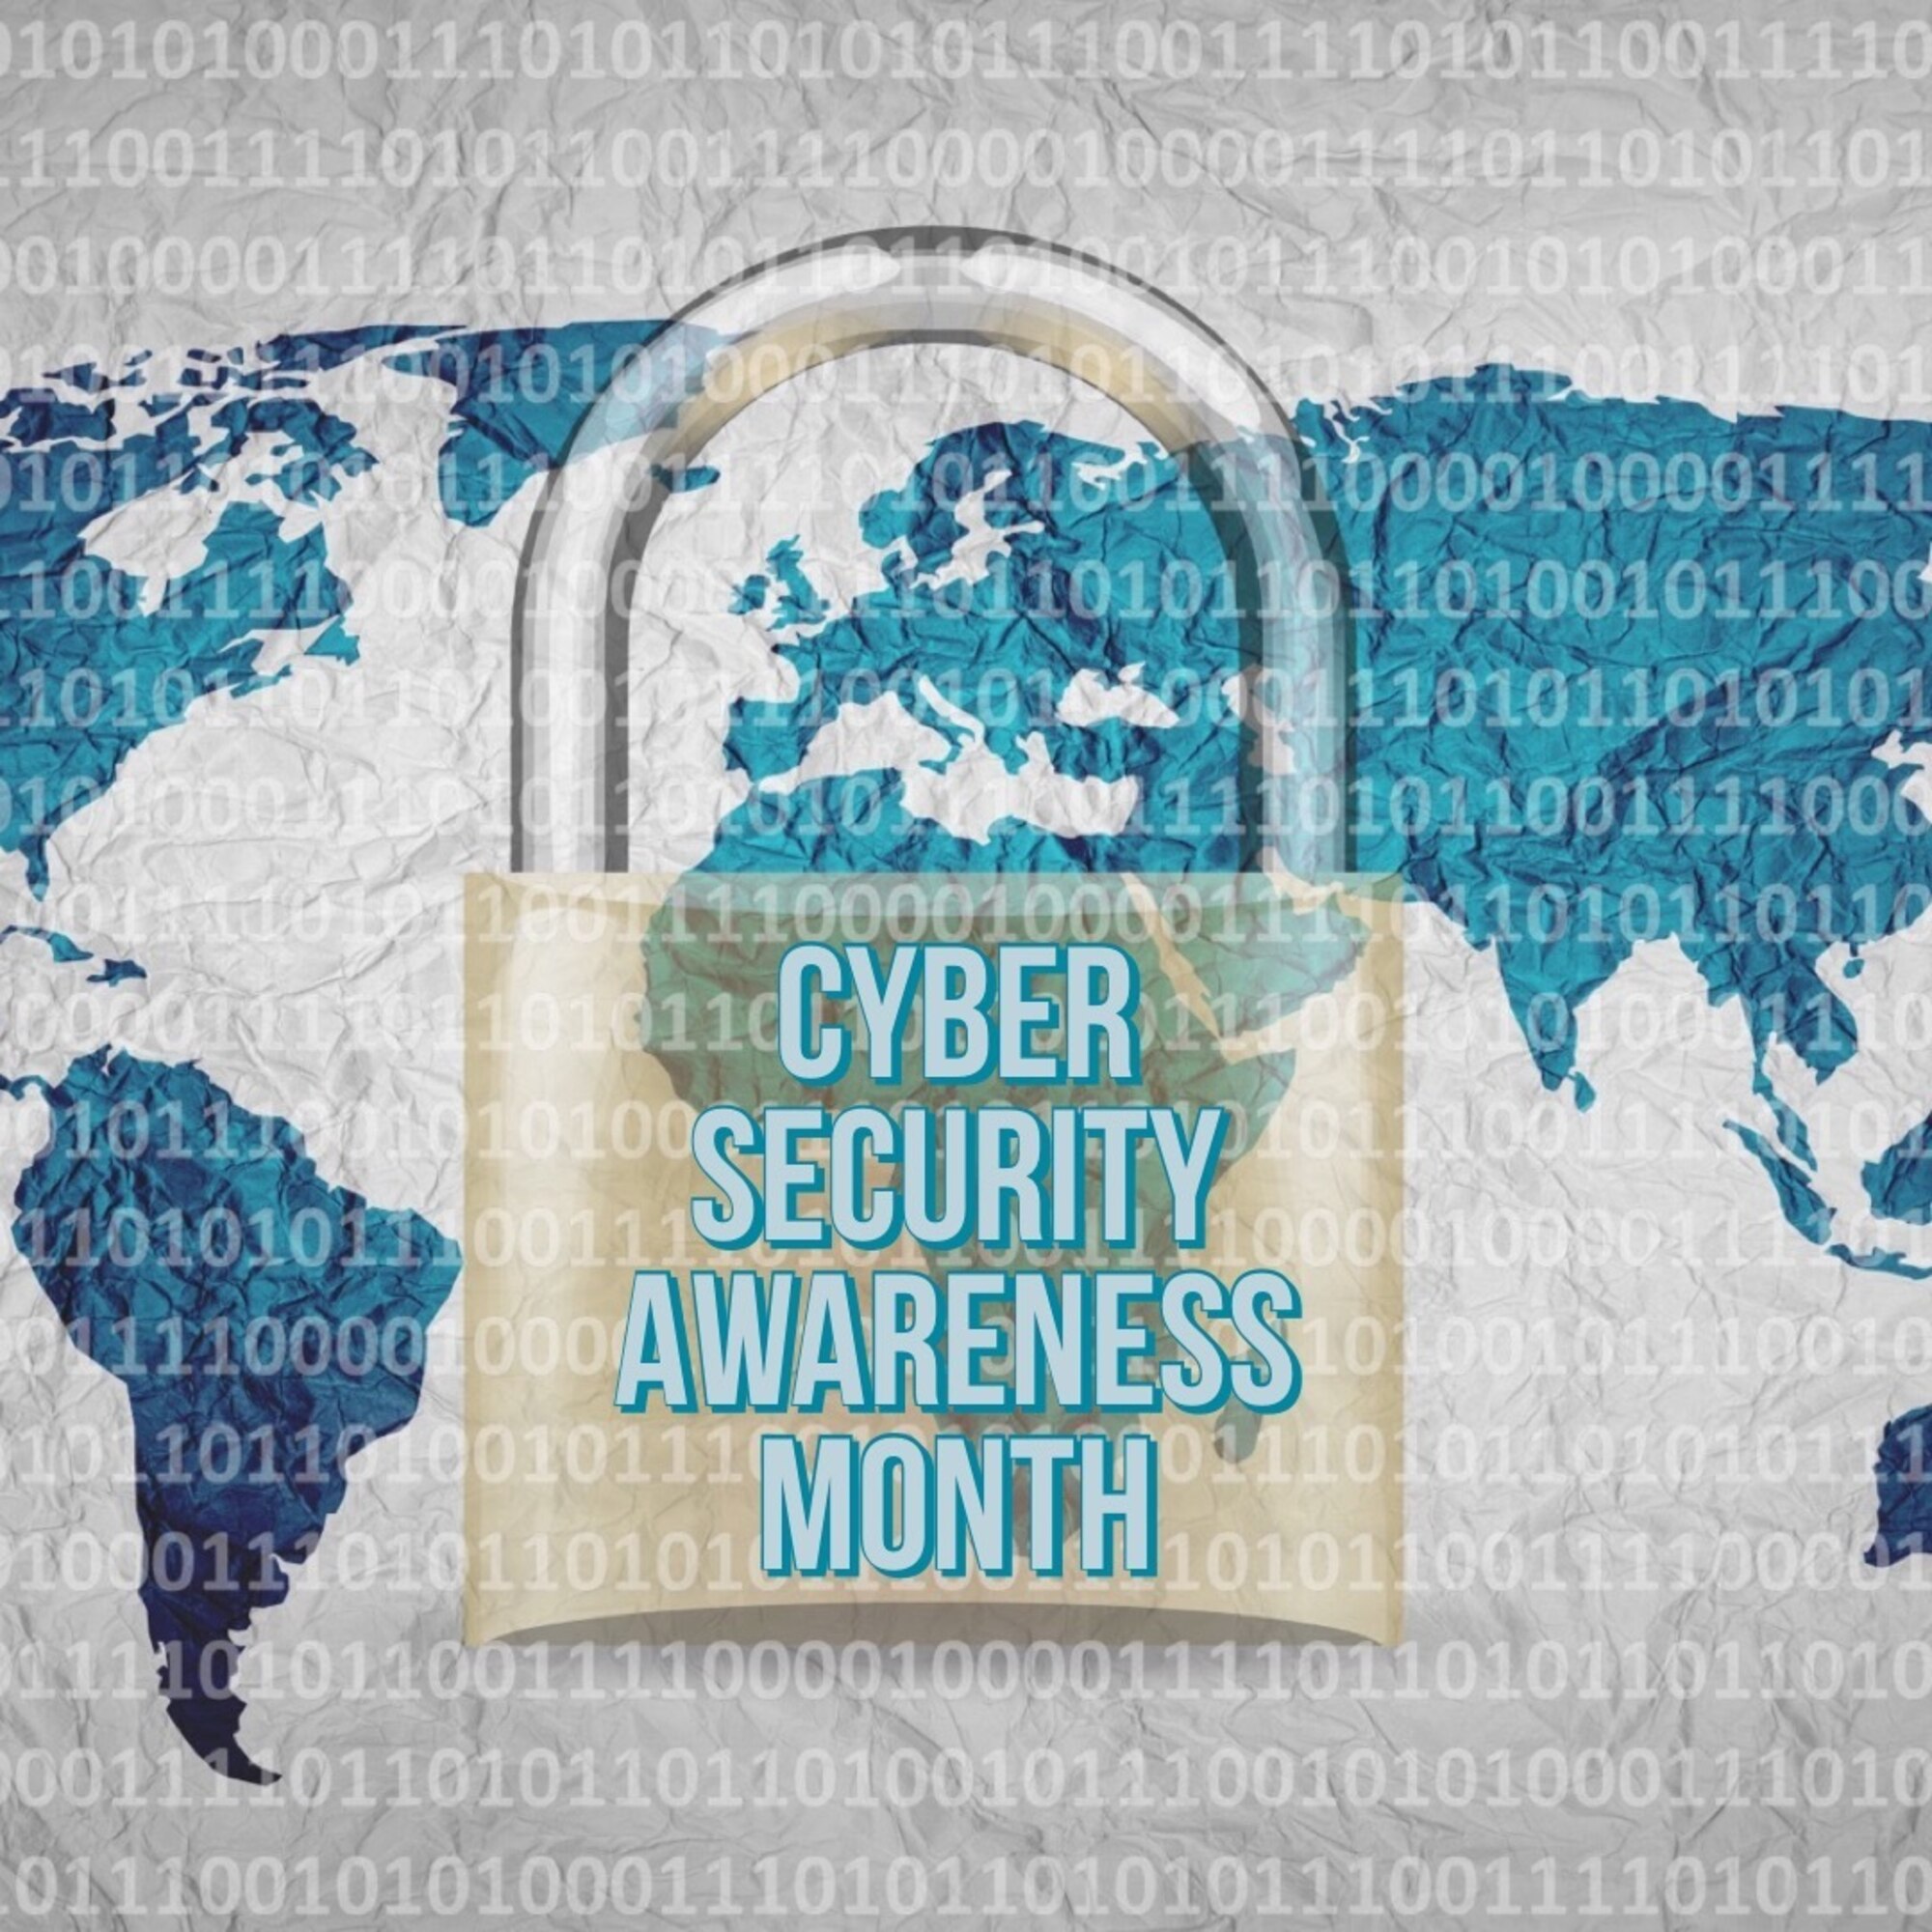 During October’s National Cyber Security Awareness Month, users can educate themselves on how to securely navigate the cyber world, while keeping their personal information secure.